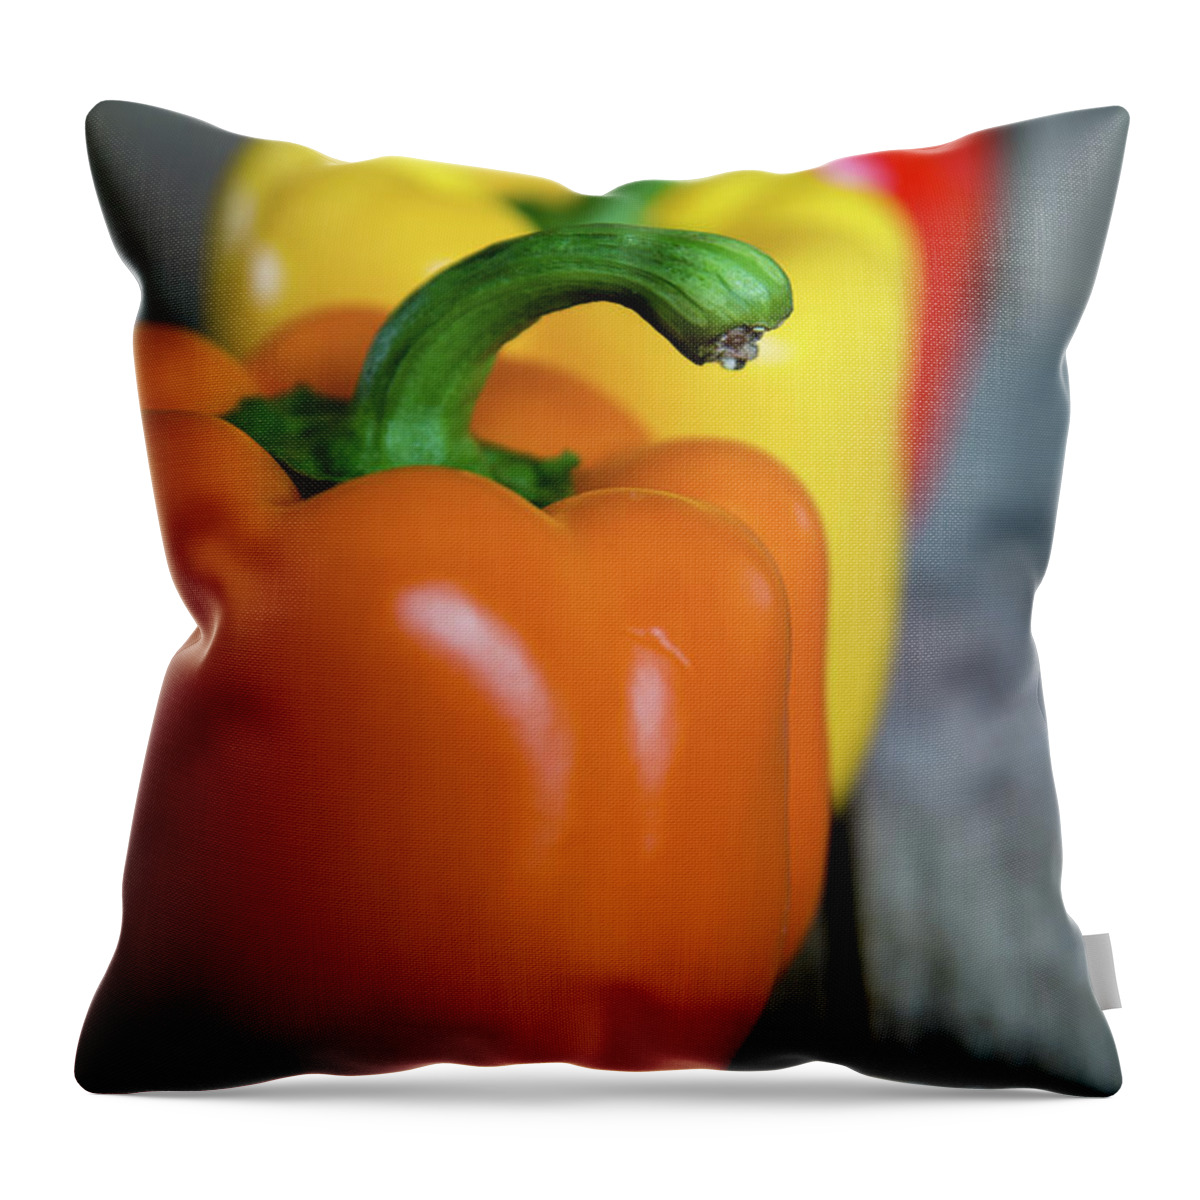 Green Throw Pillow featuring the photograph Array of Peppers by Deborah Klubertanz